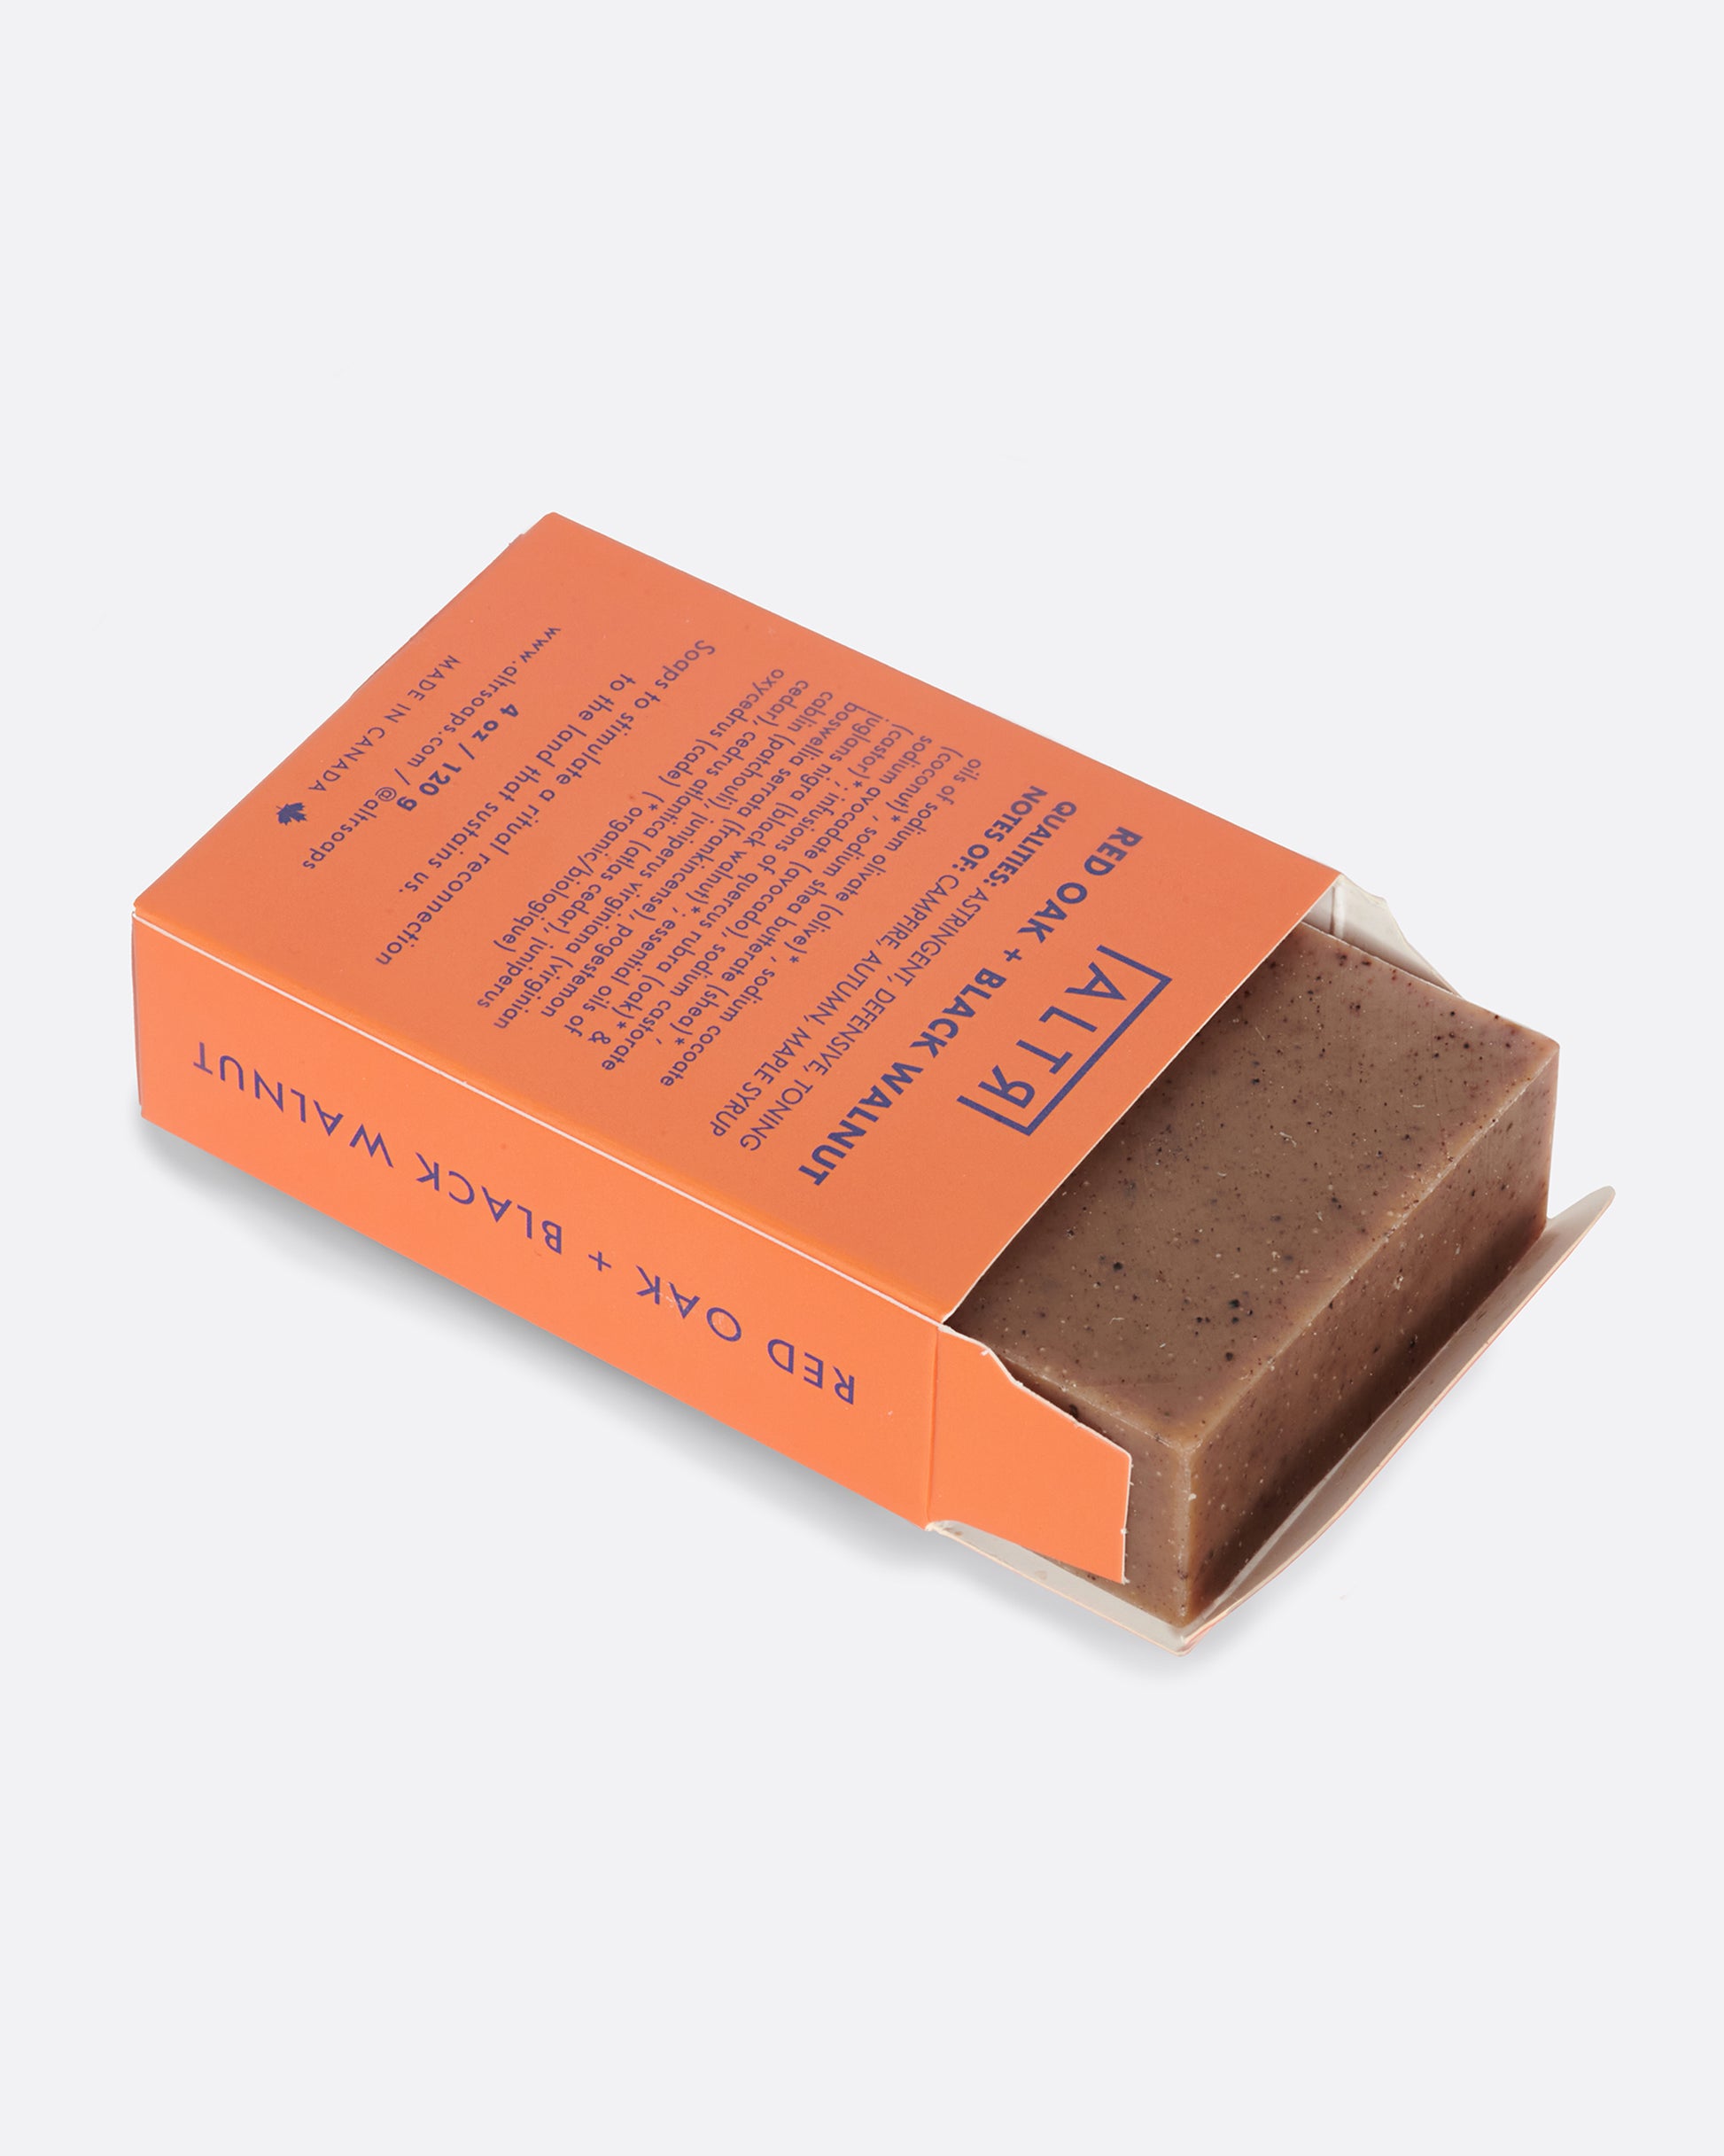 Bar soap made from ground Black Walnut husks and Red Oak bark to create a powerful, cleansing soap that is both smokey and woodsy.